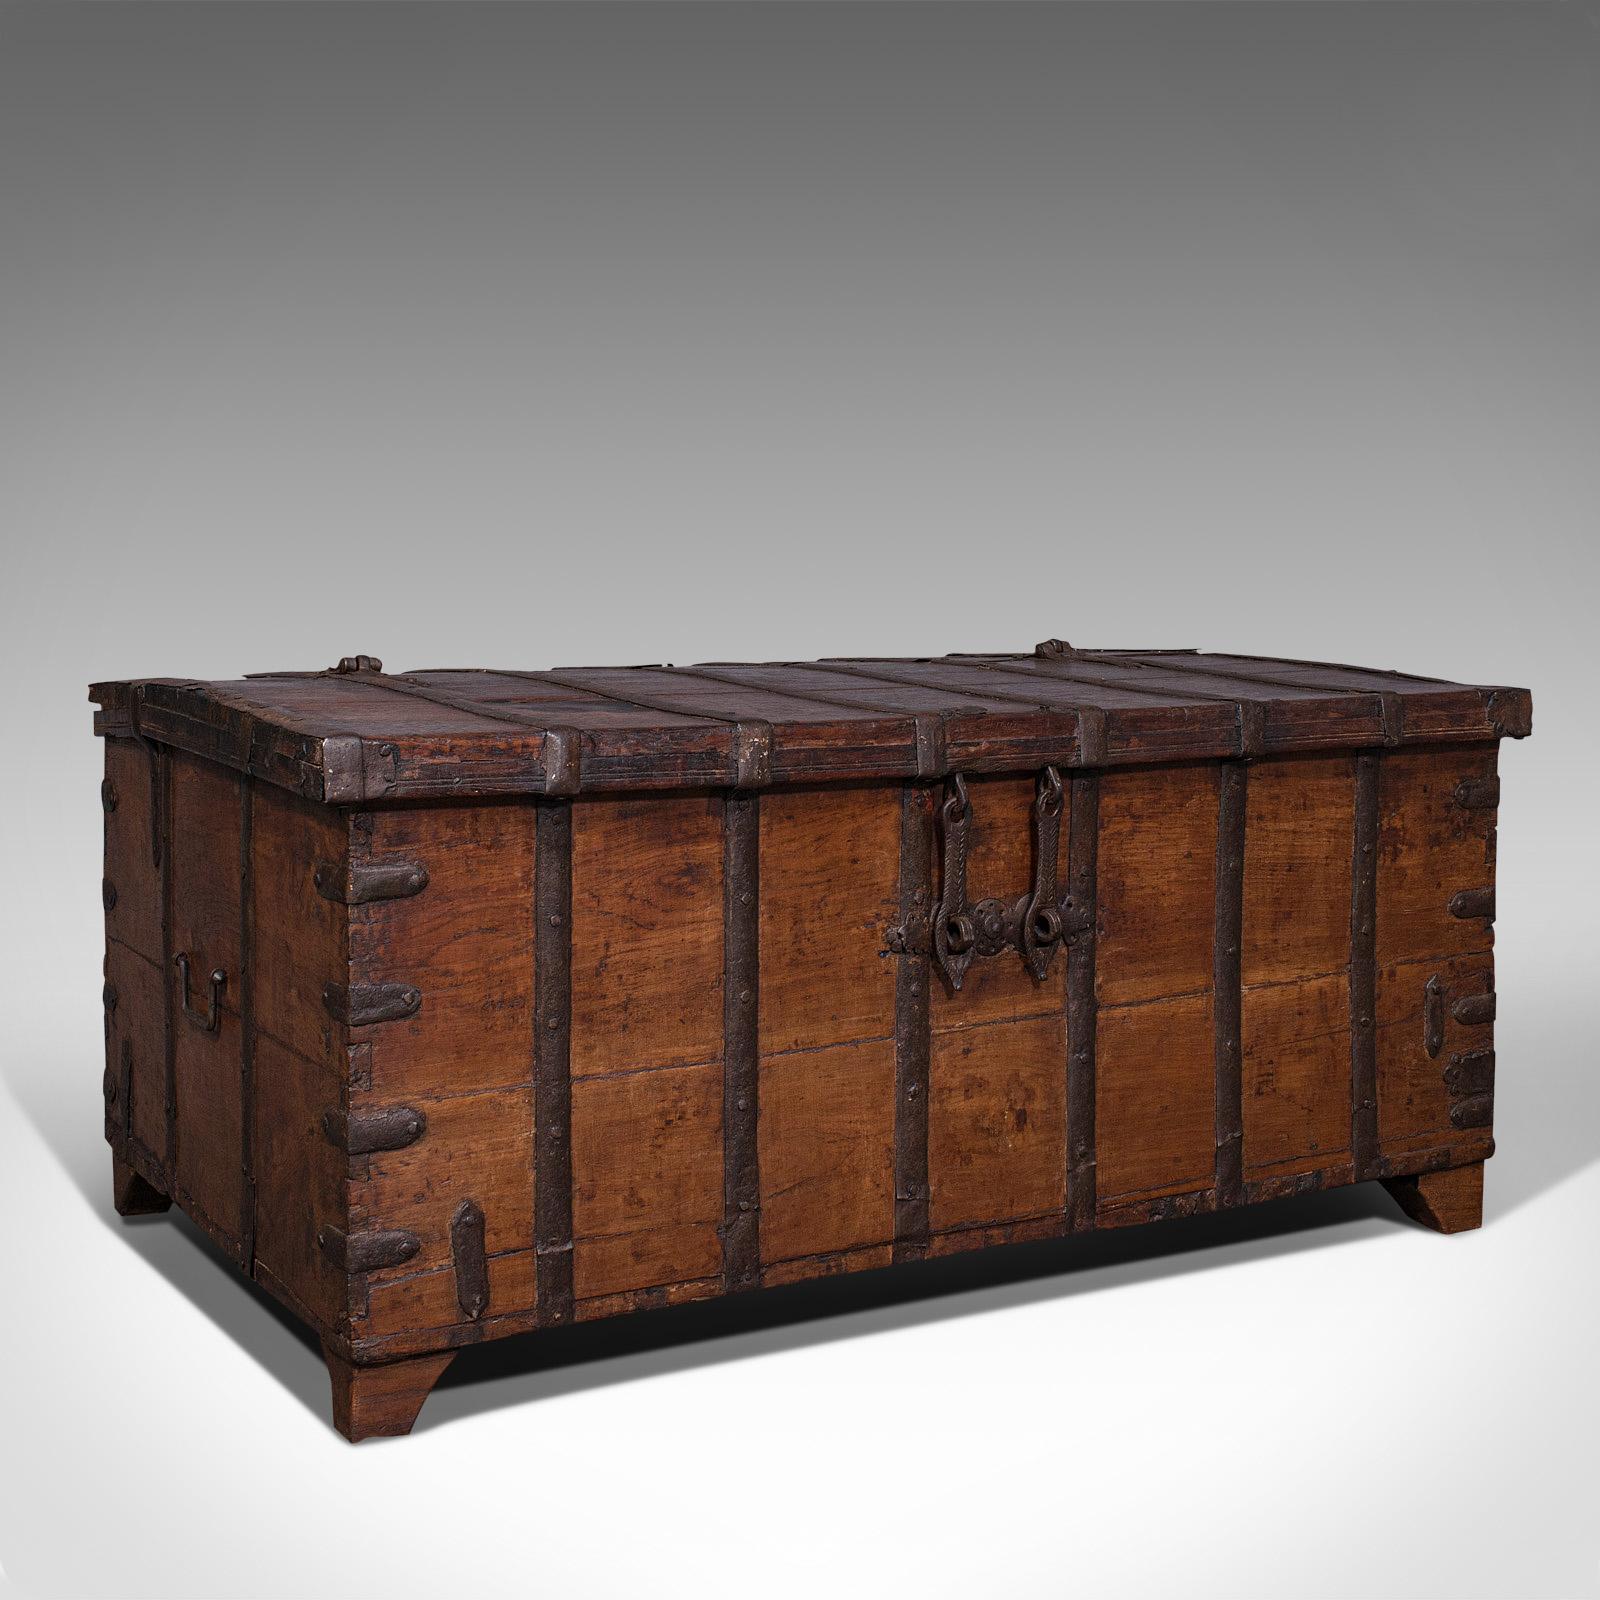 This is an antique merchant's chest. An Oriental, solid teak and iron bound trunk, dating to the William III period, circa 1700.

Beguiling, aged chest of superior and heavy proportion
Displays a desirable aged patina throughout
Solid teak